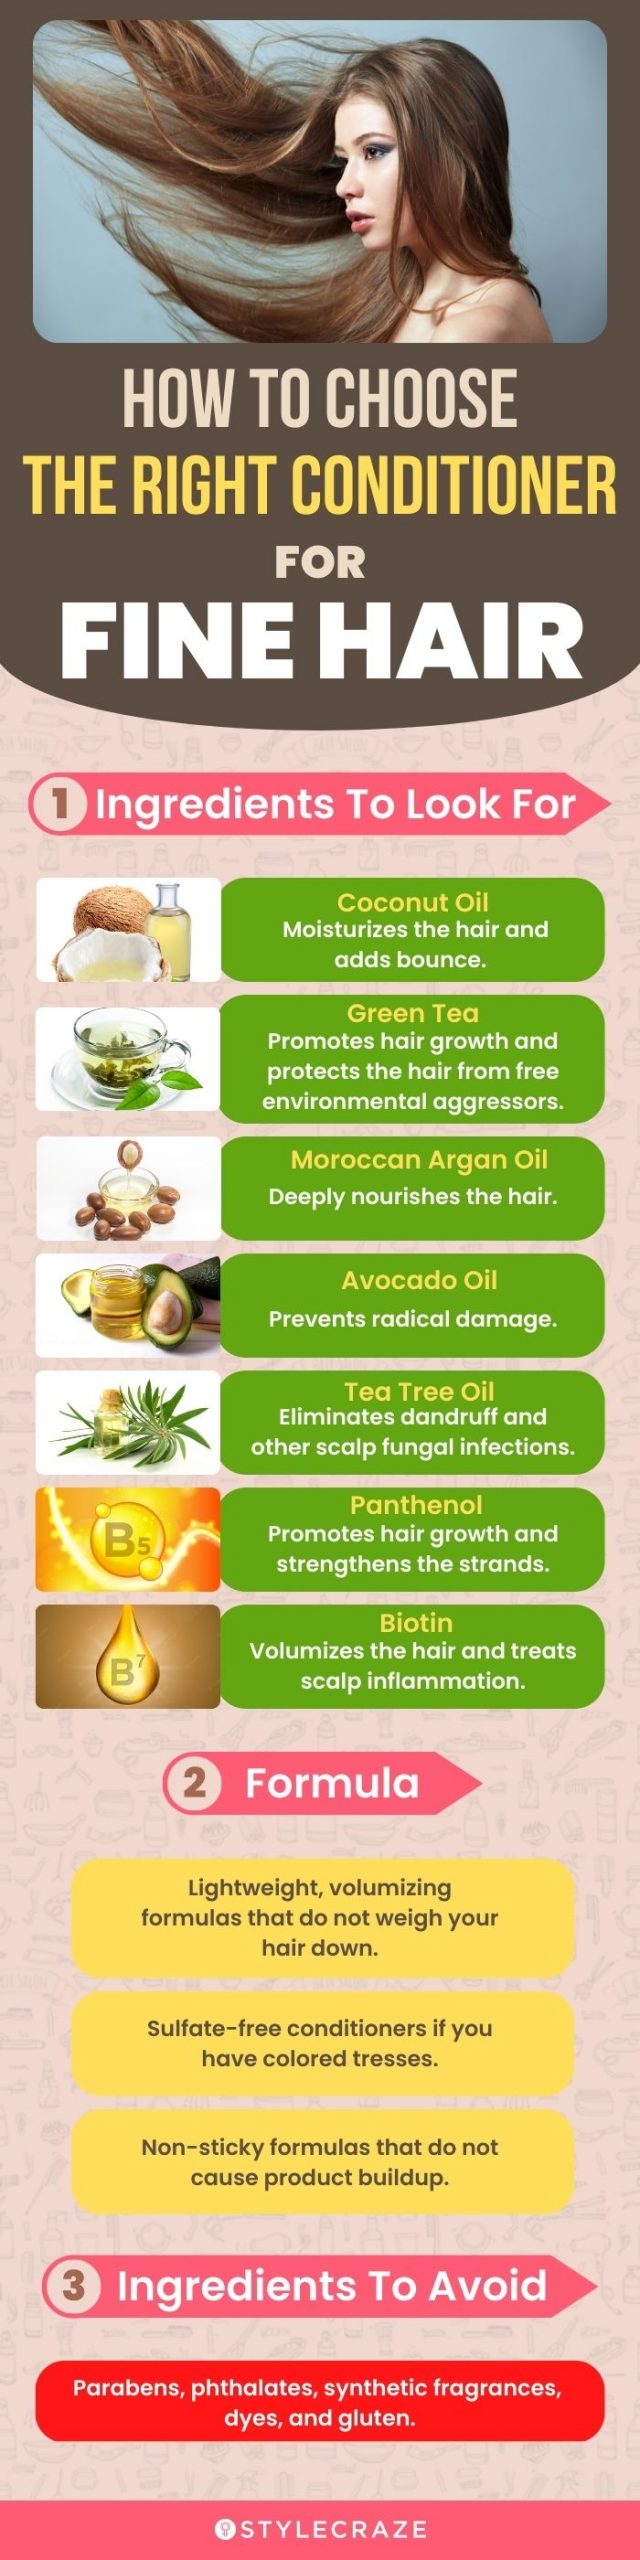 How To Choose The Right Conditioner For Fine Hair (infographic)